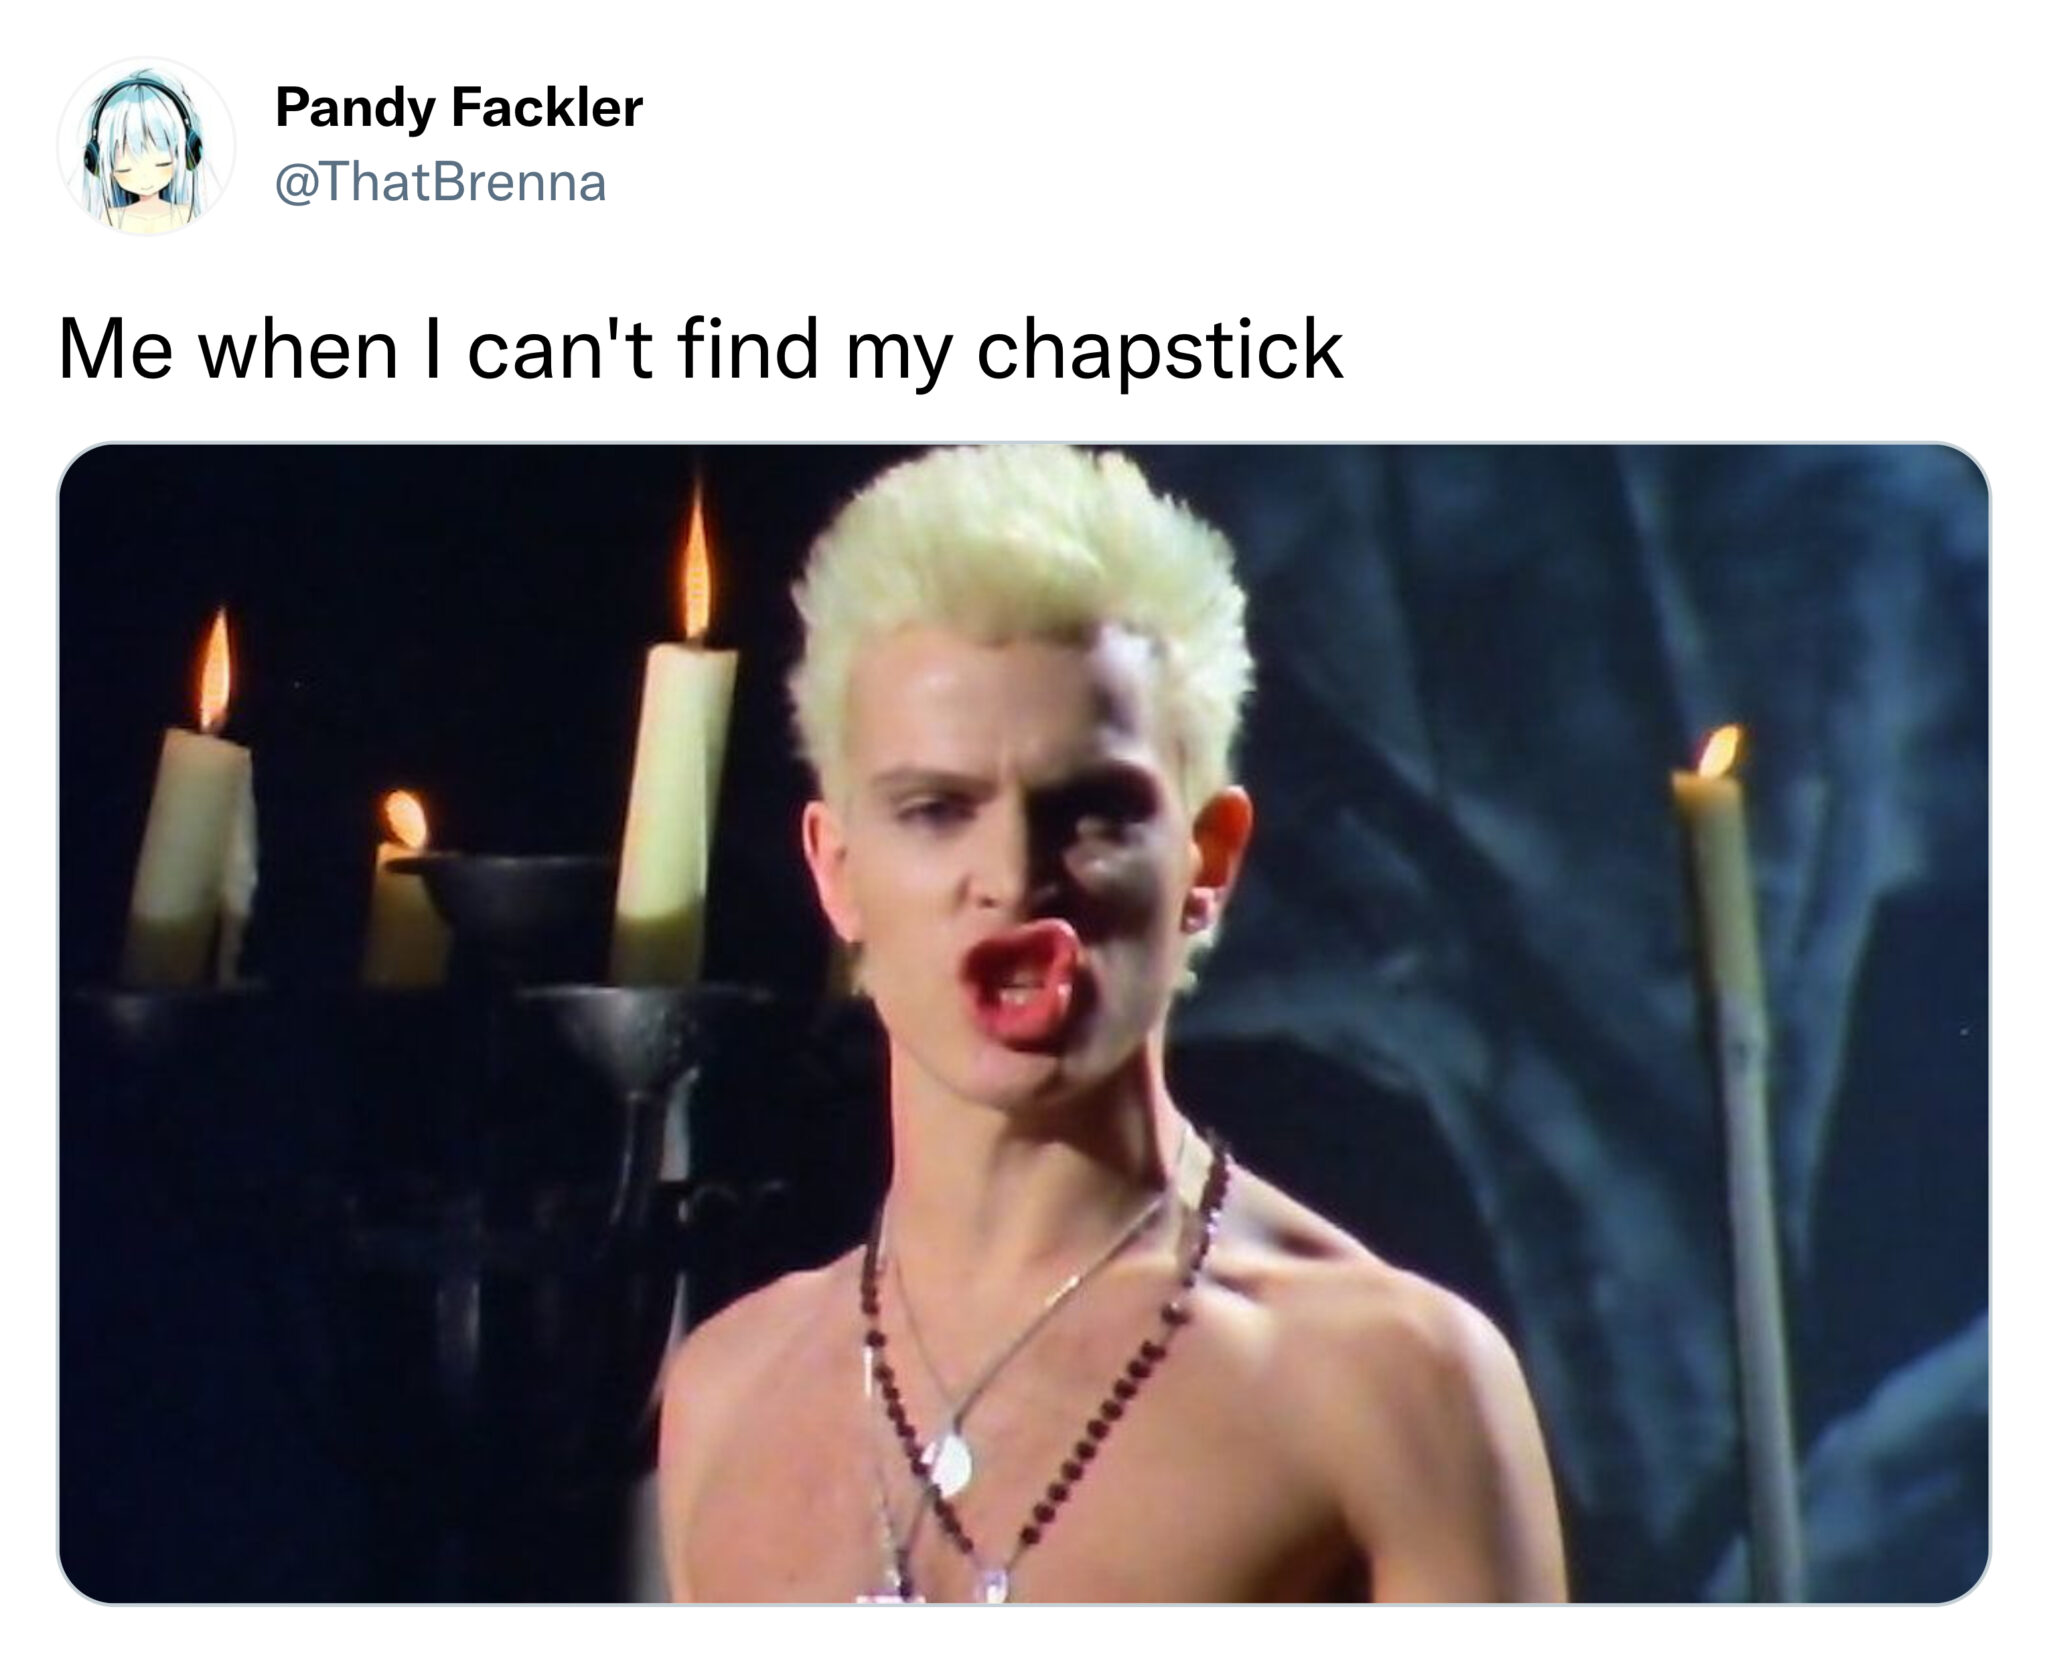 funny tweets - billy idol white wedding - Pandy Fackler Me when I can't find my chapstick